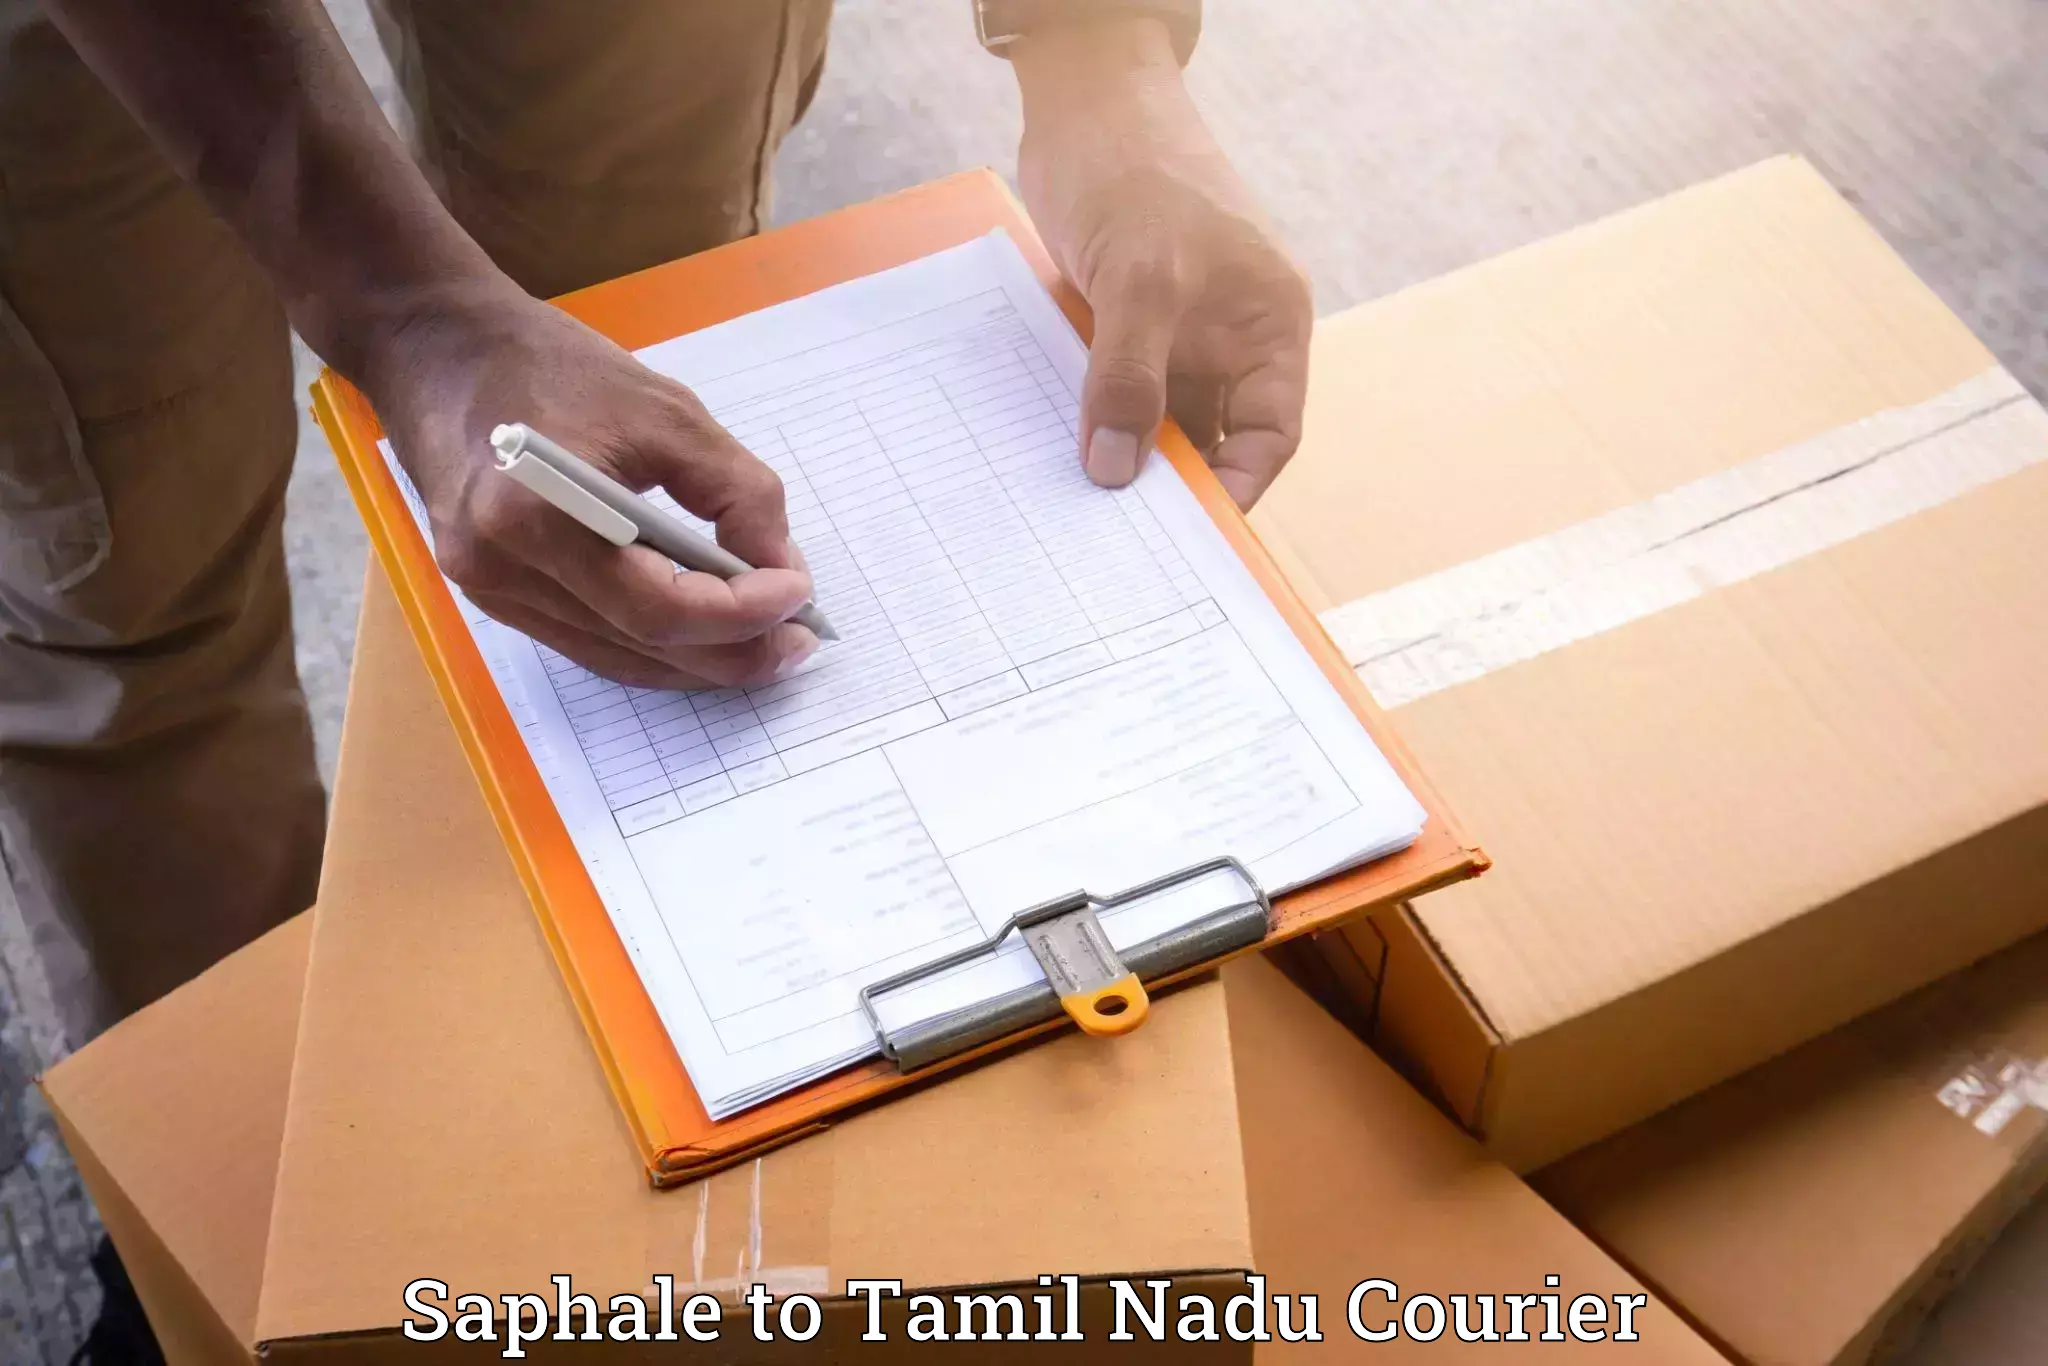 Hassle-free relocation Saphale to Perambalur